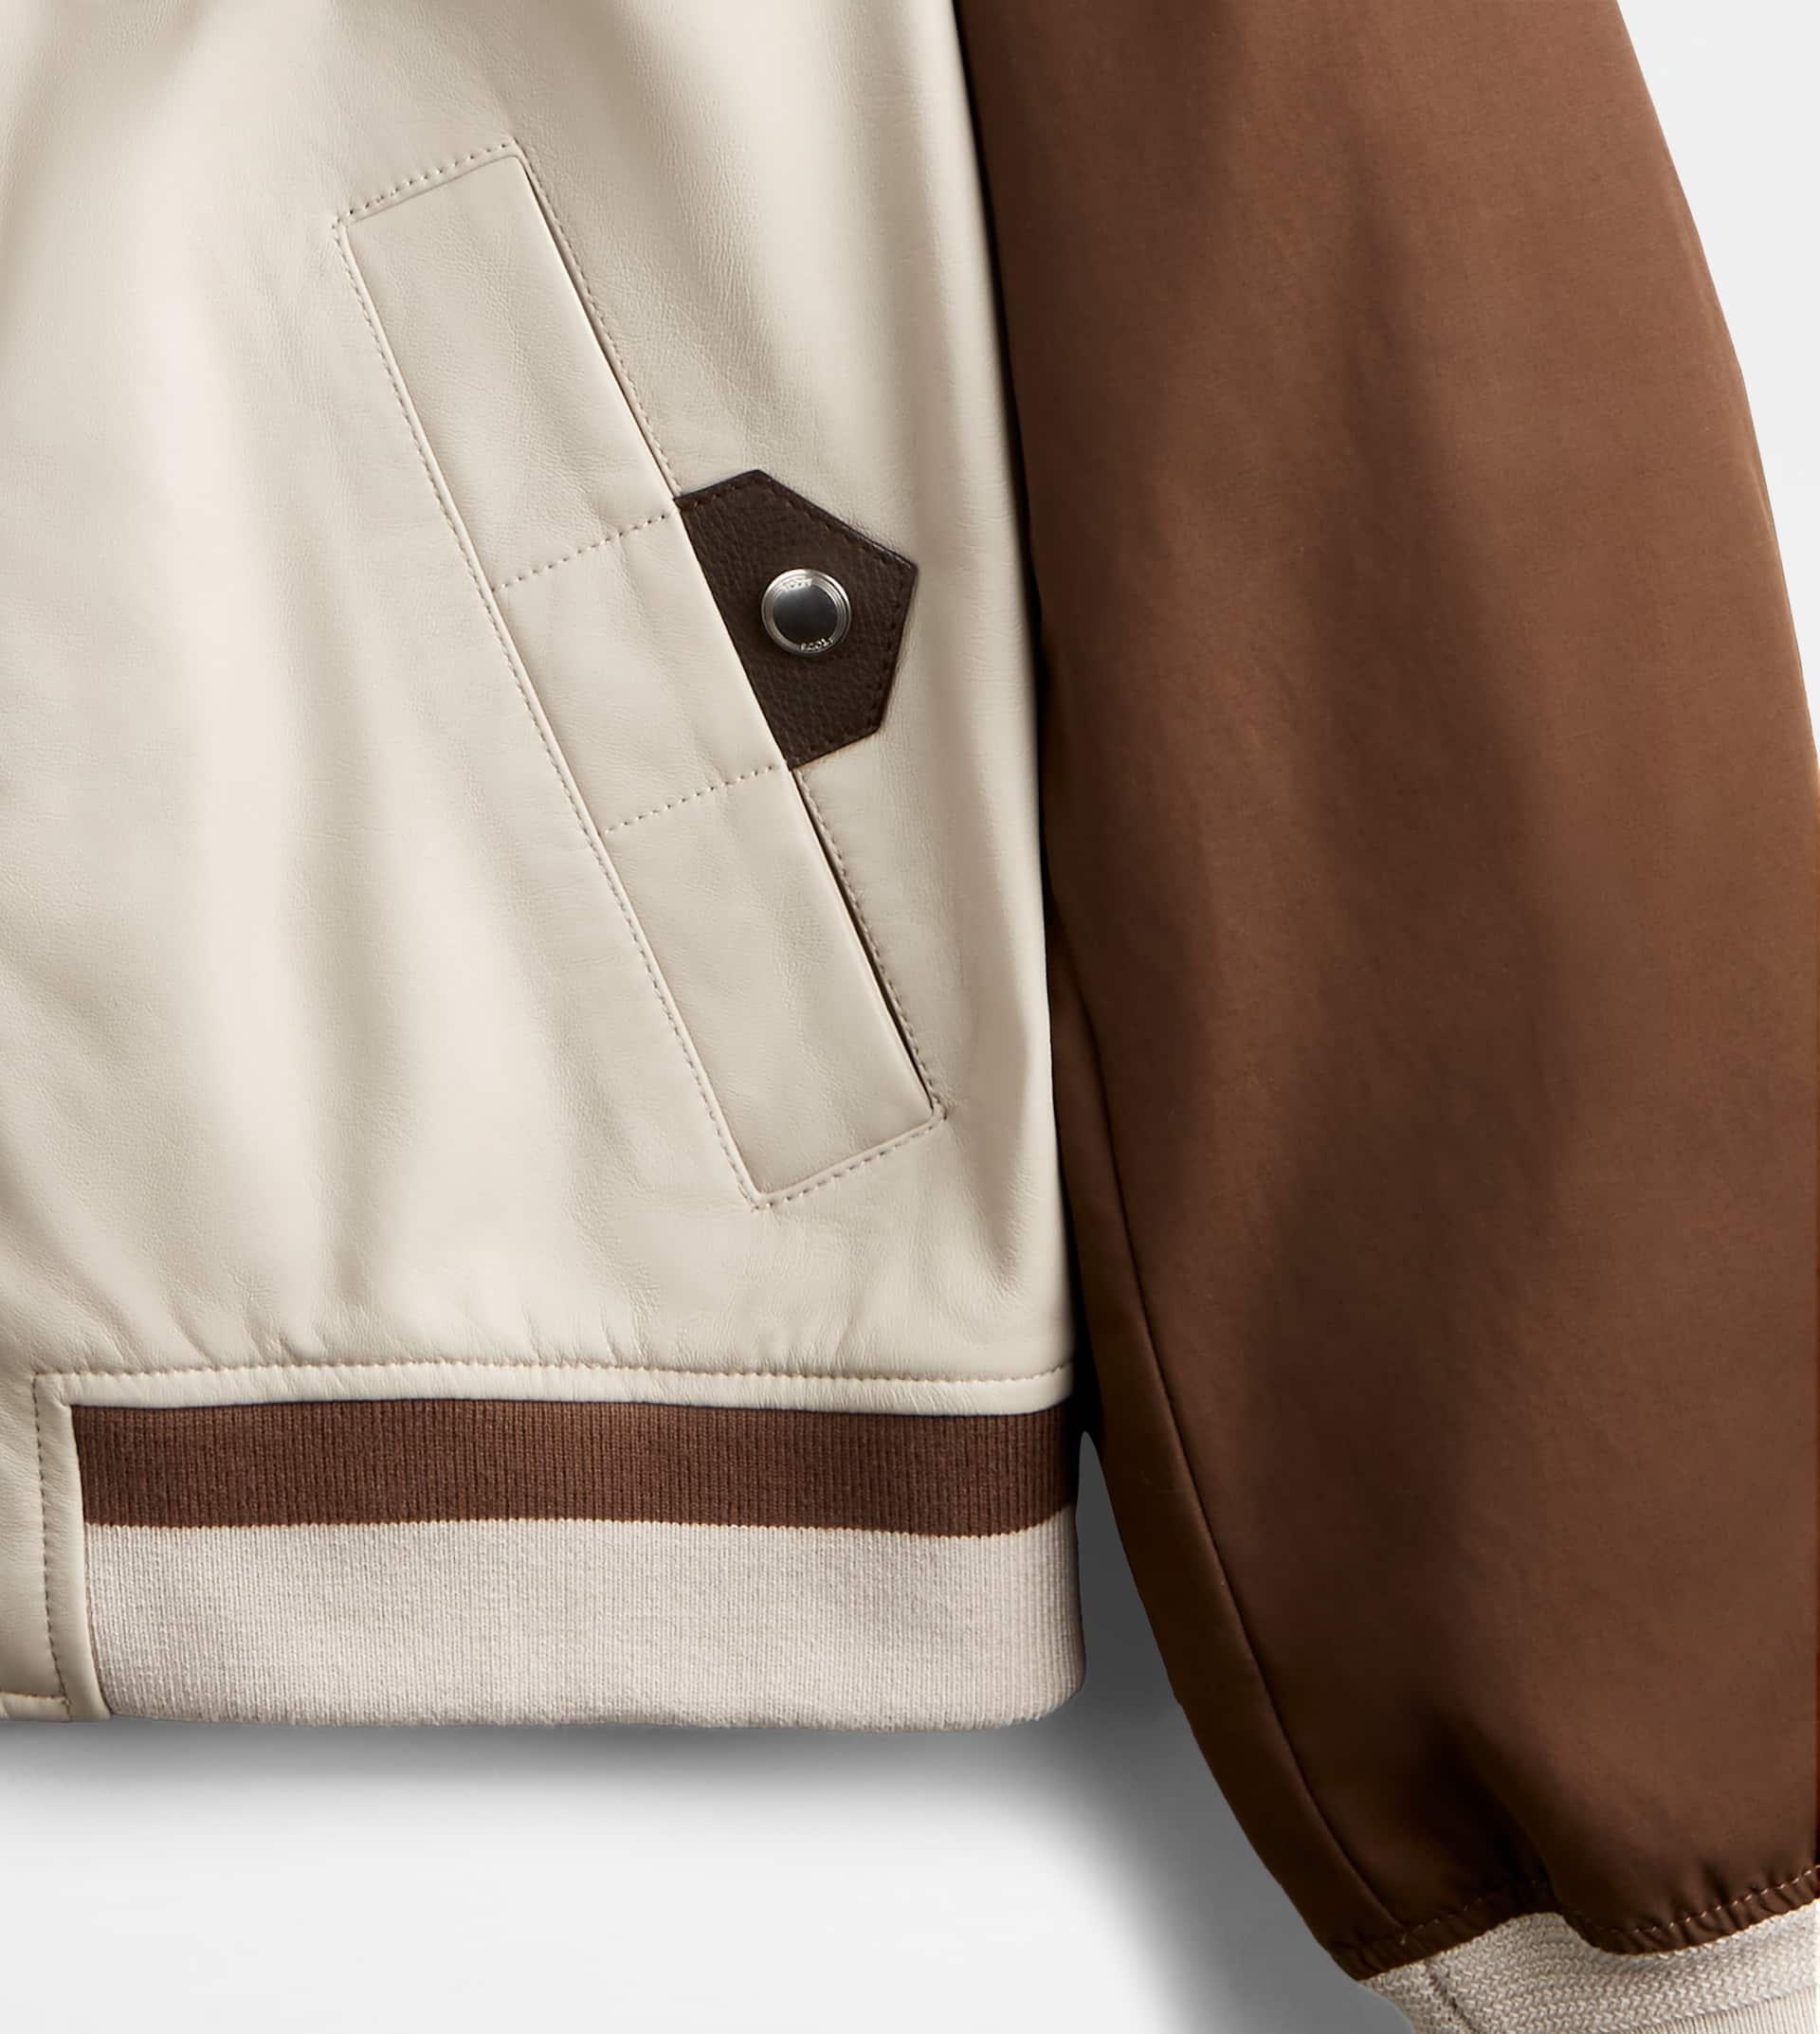 BOMBER JACKET IN LEATHER - BROWN, OFF WHITE - 9